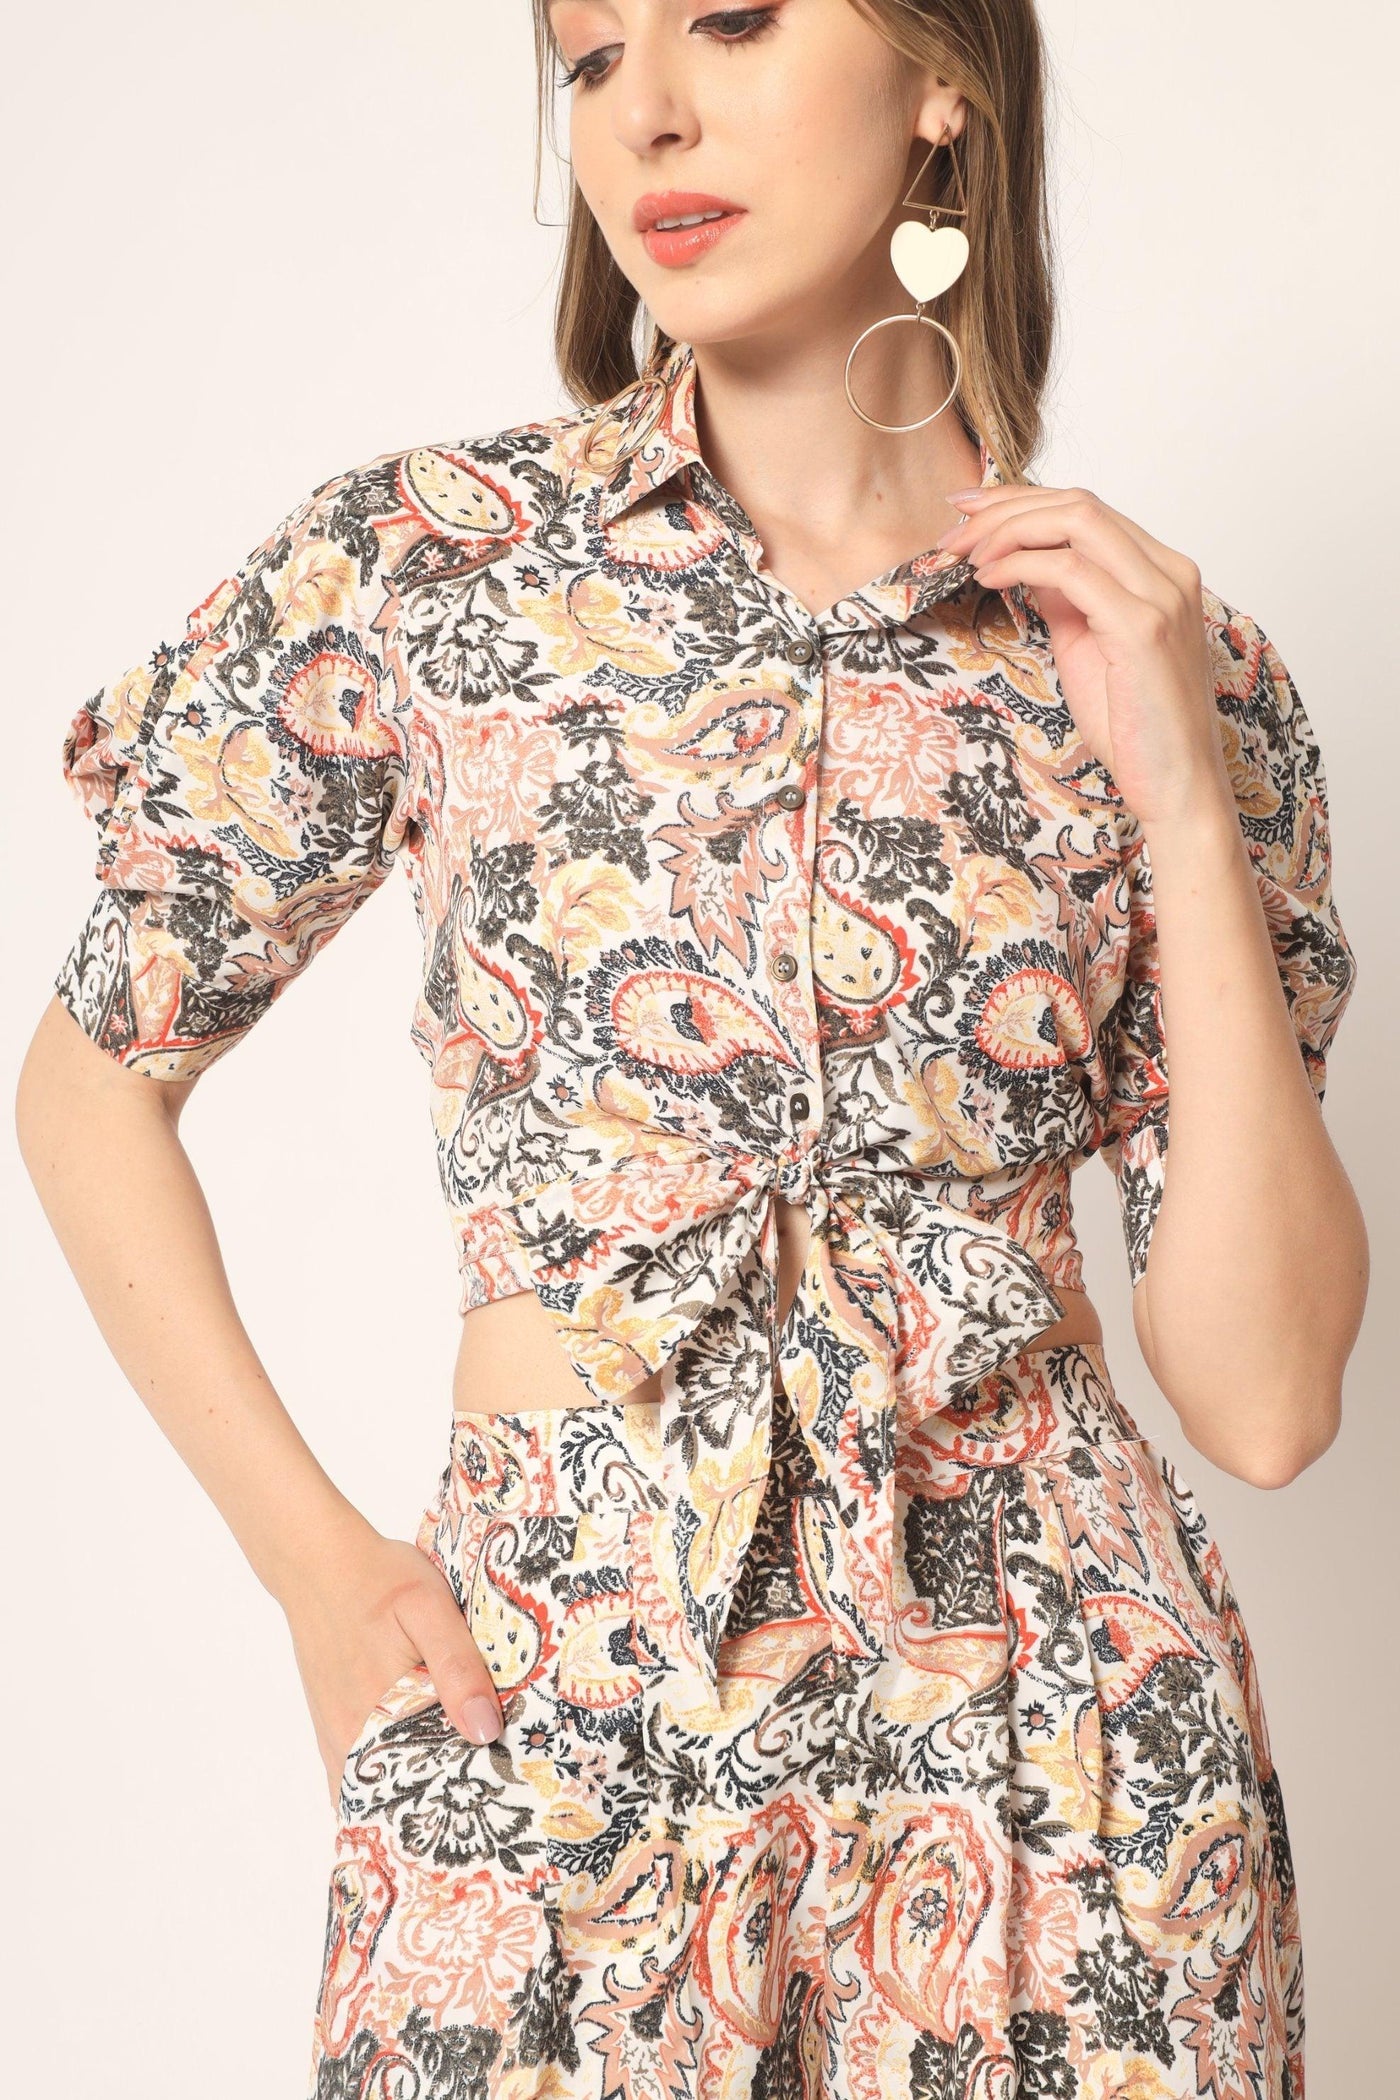 Beige Crepe Digital Printed Top With Matching Trouser - Uboric